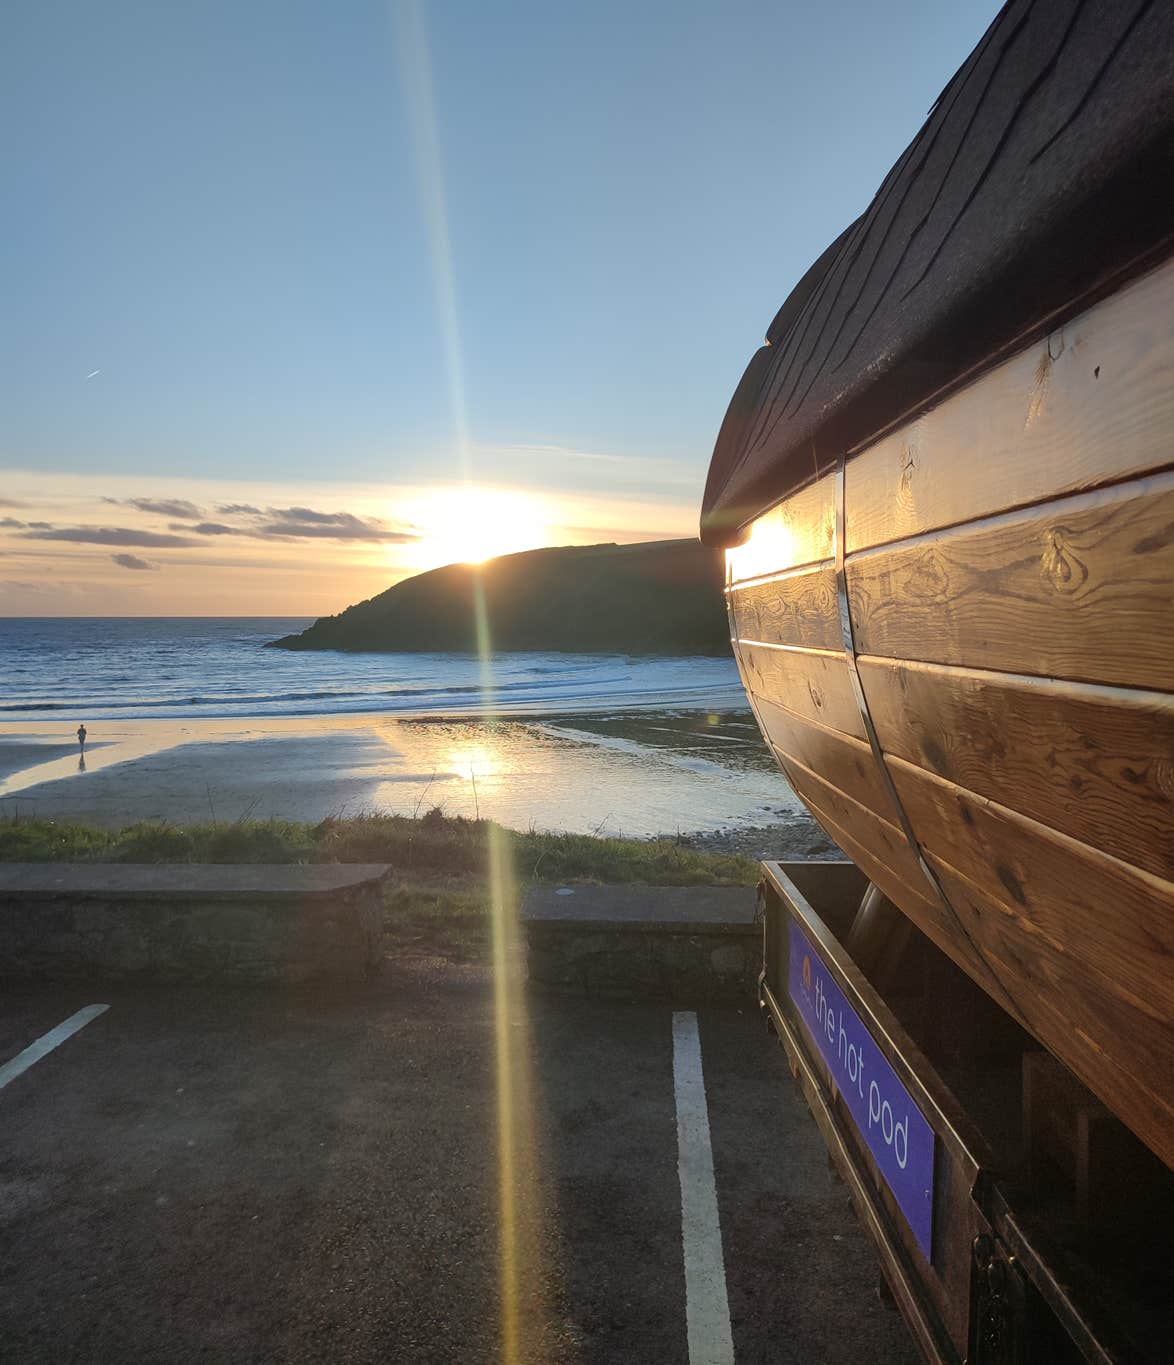 The sunsetting behind a mountain at Kilmurrin Cove in Waterford with The Hot Pod sauna.